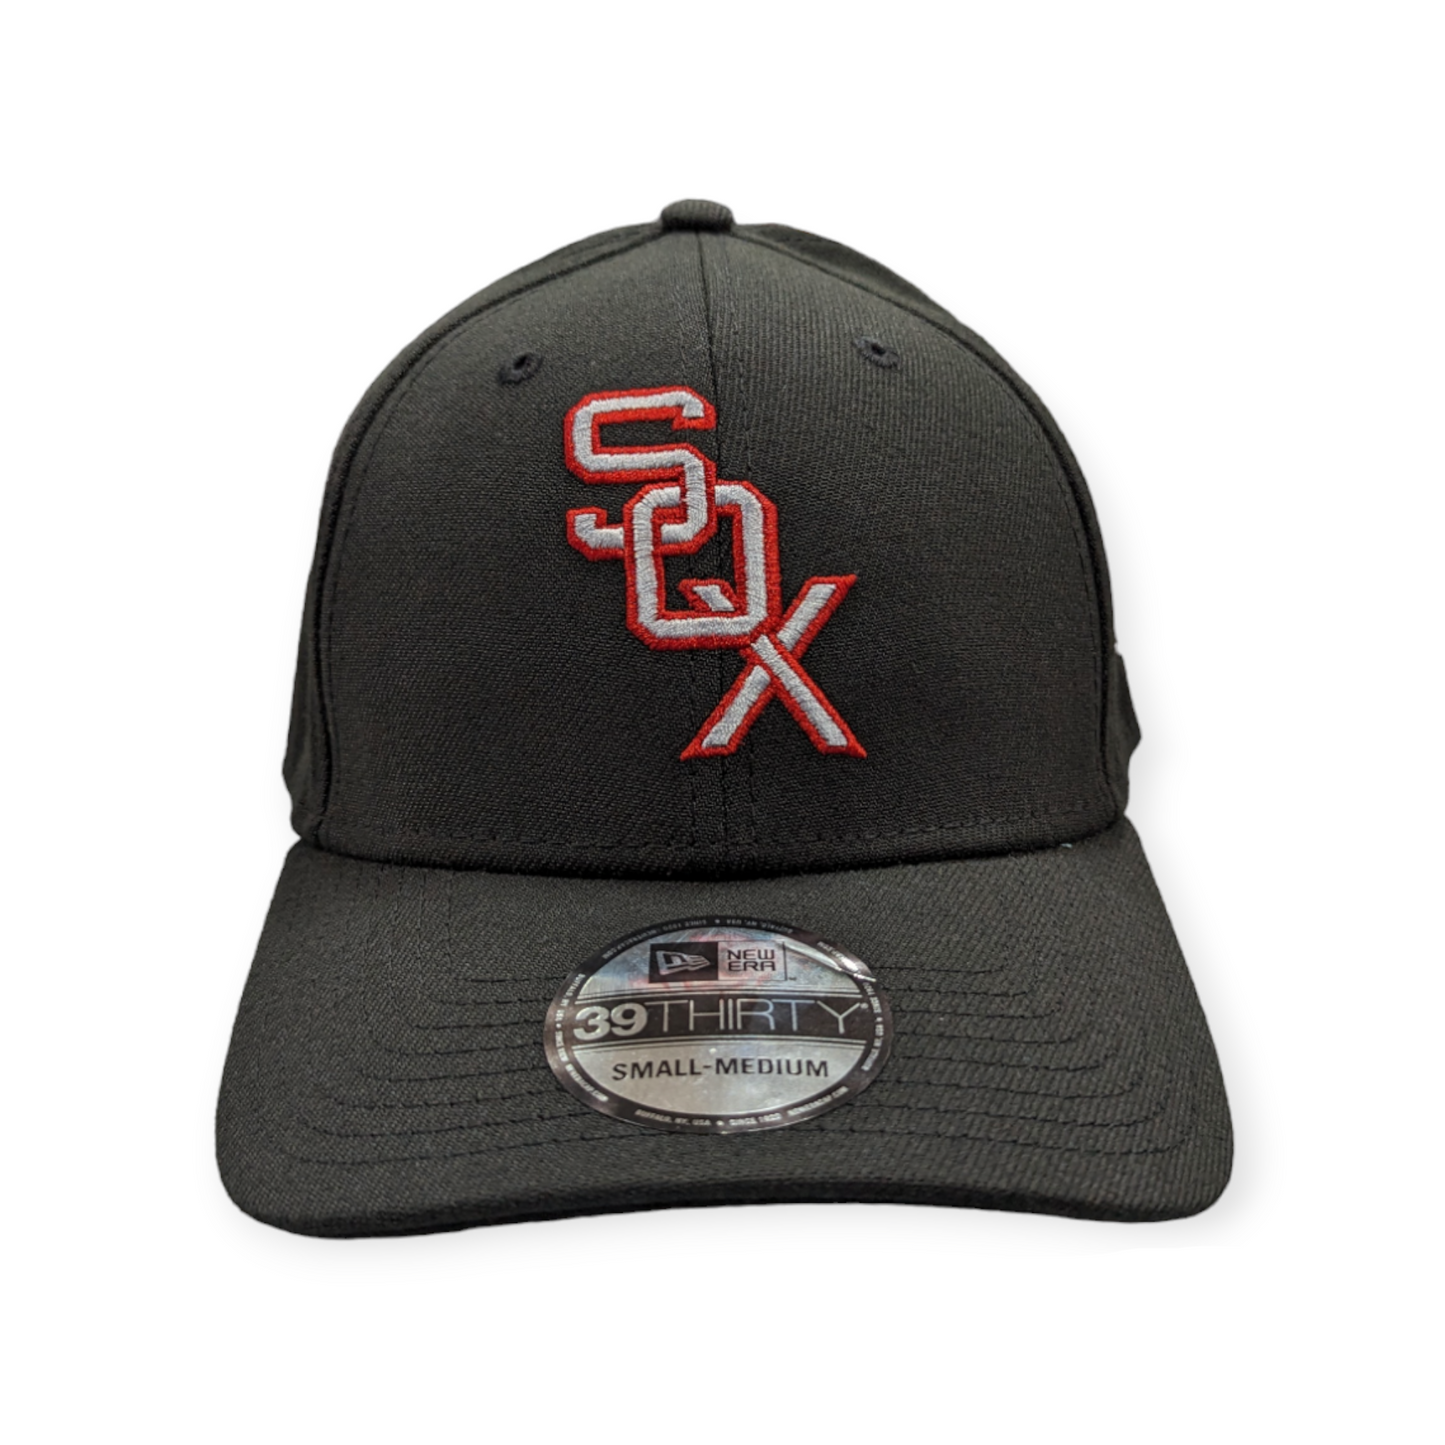 Chicago White Sox 1959 Cooperstown Classics Black 39THIRTY Flex Fit New Era Hat